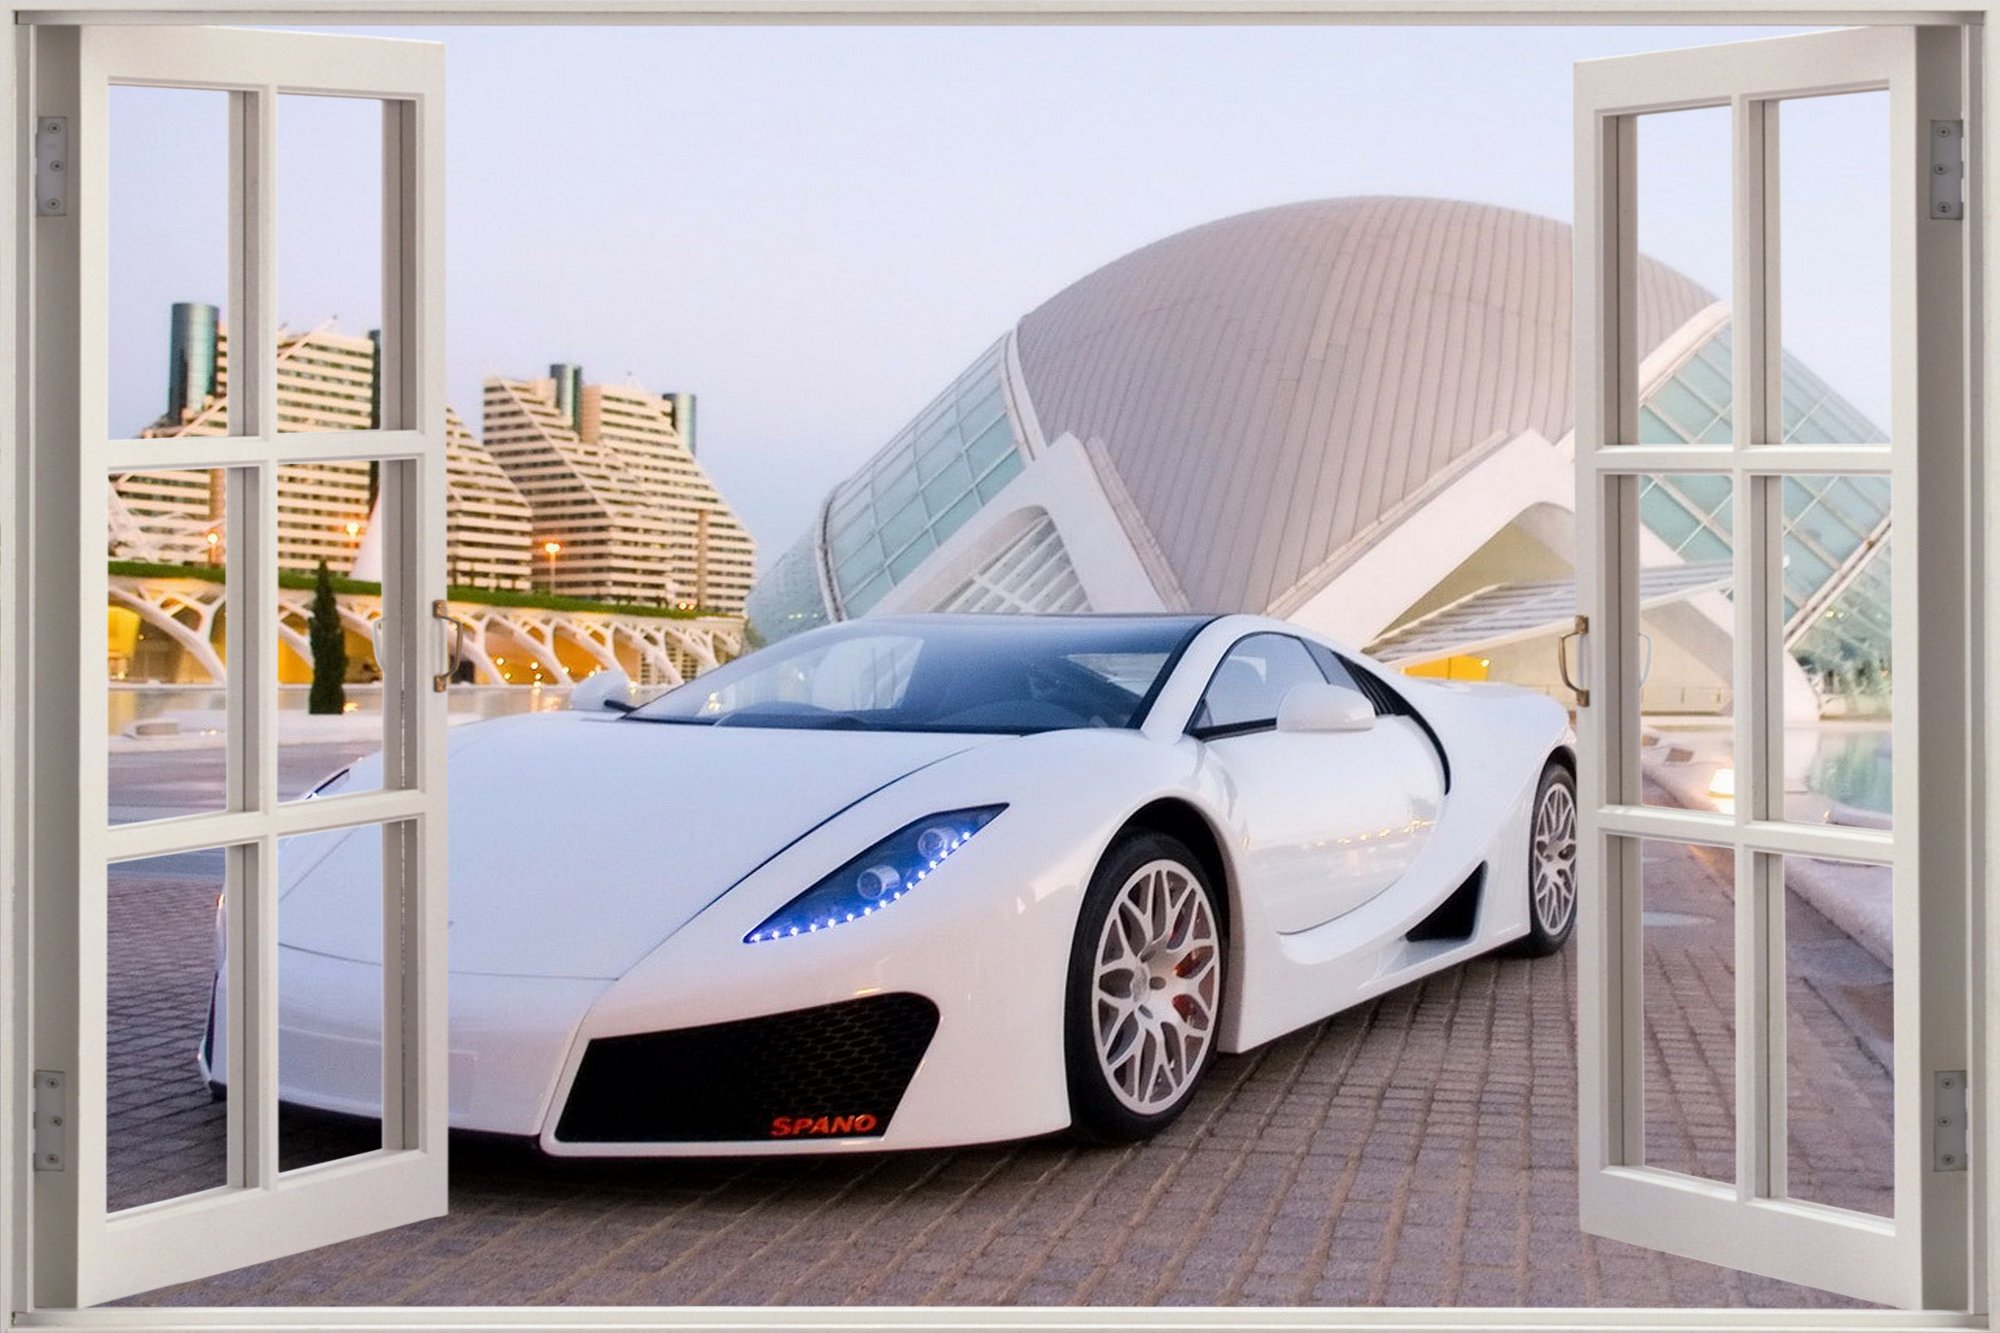 Huge 3d Window Exotic Sports Car Wall Stickers Film Mural Decal